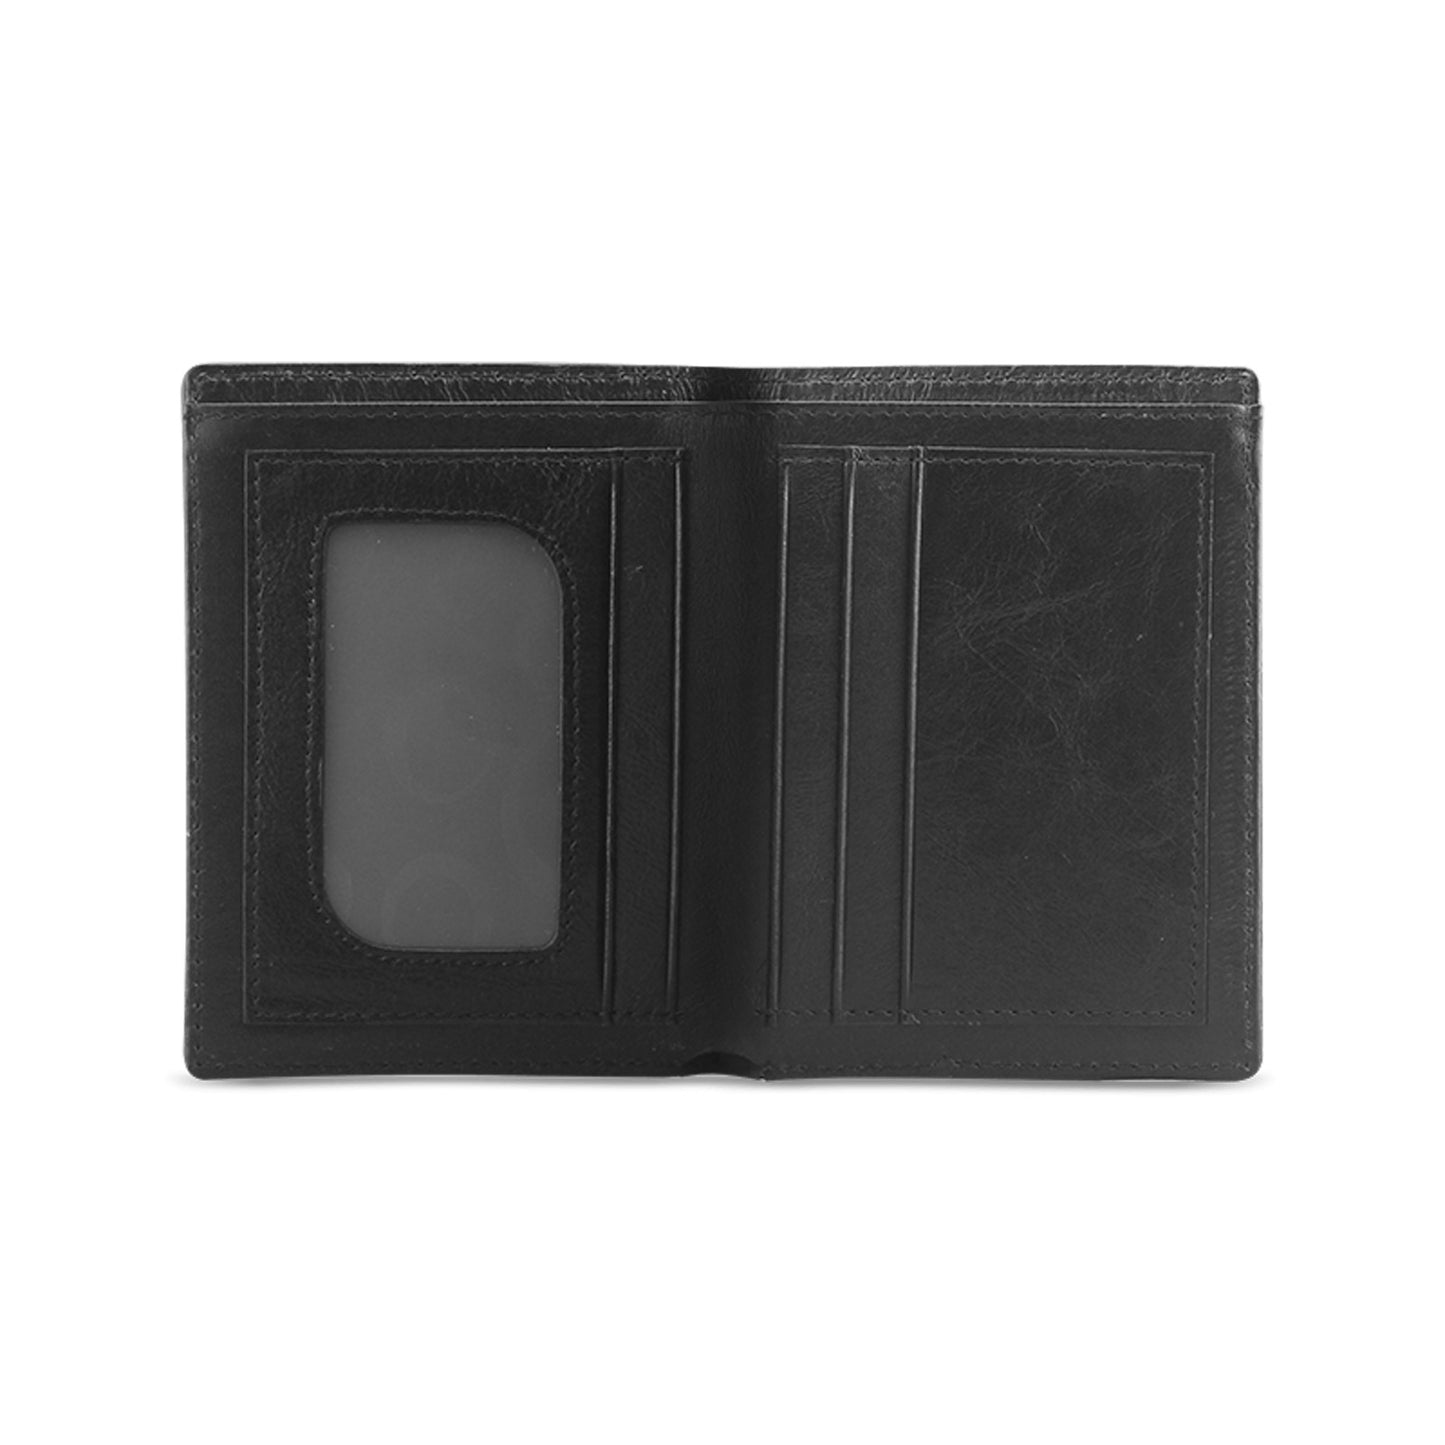 Let's Cruise Men's Leather Wallet